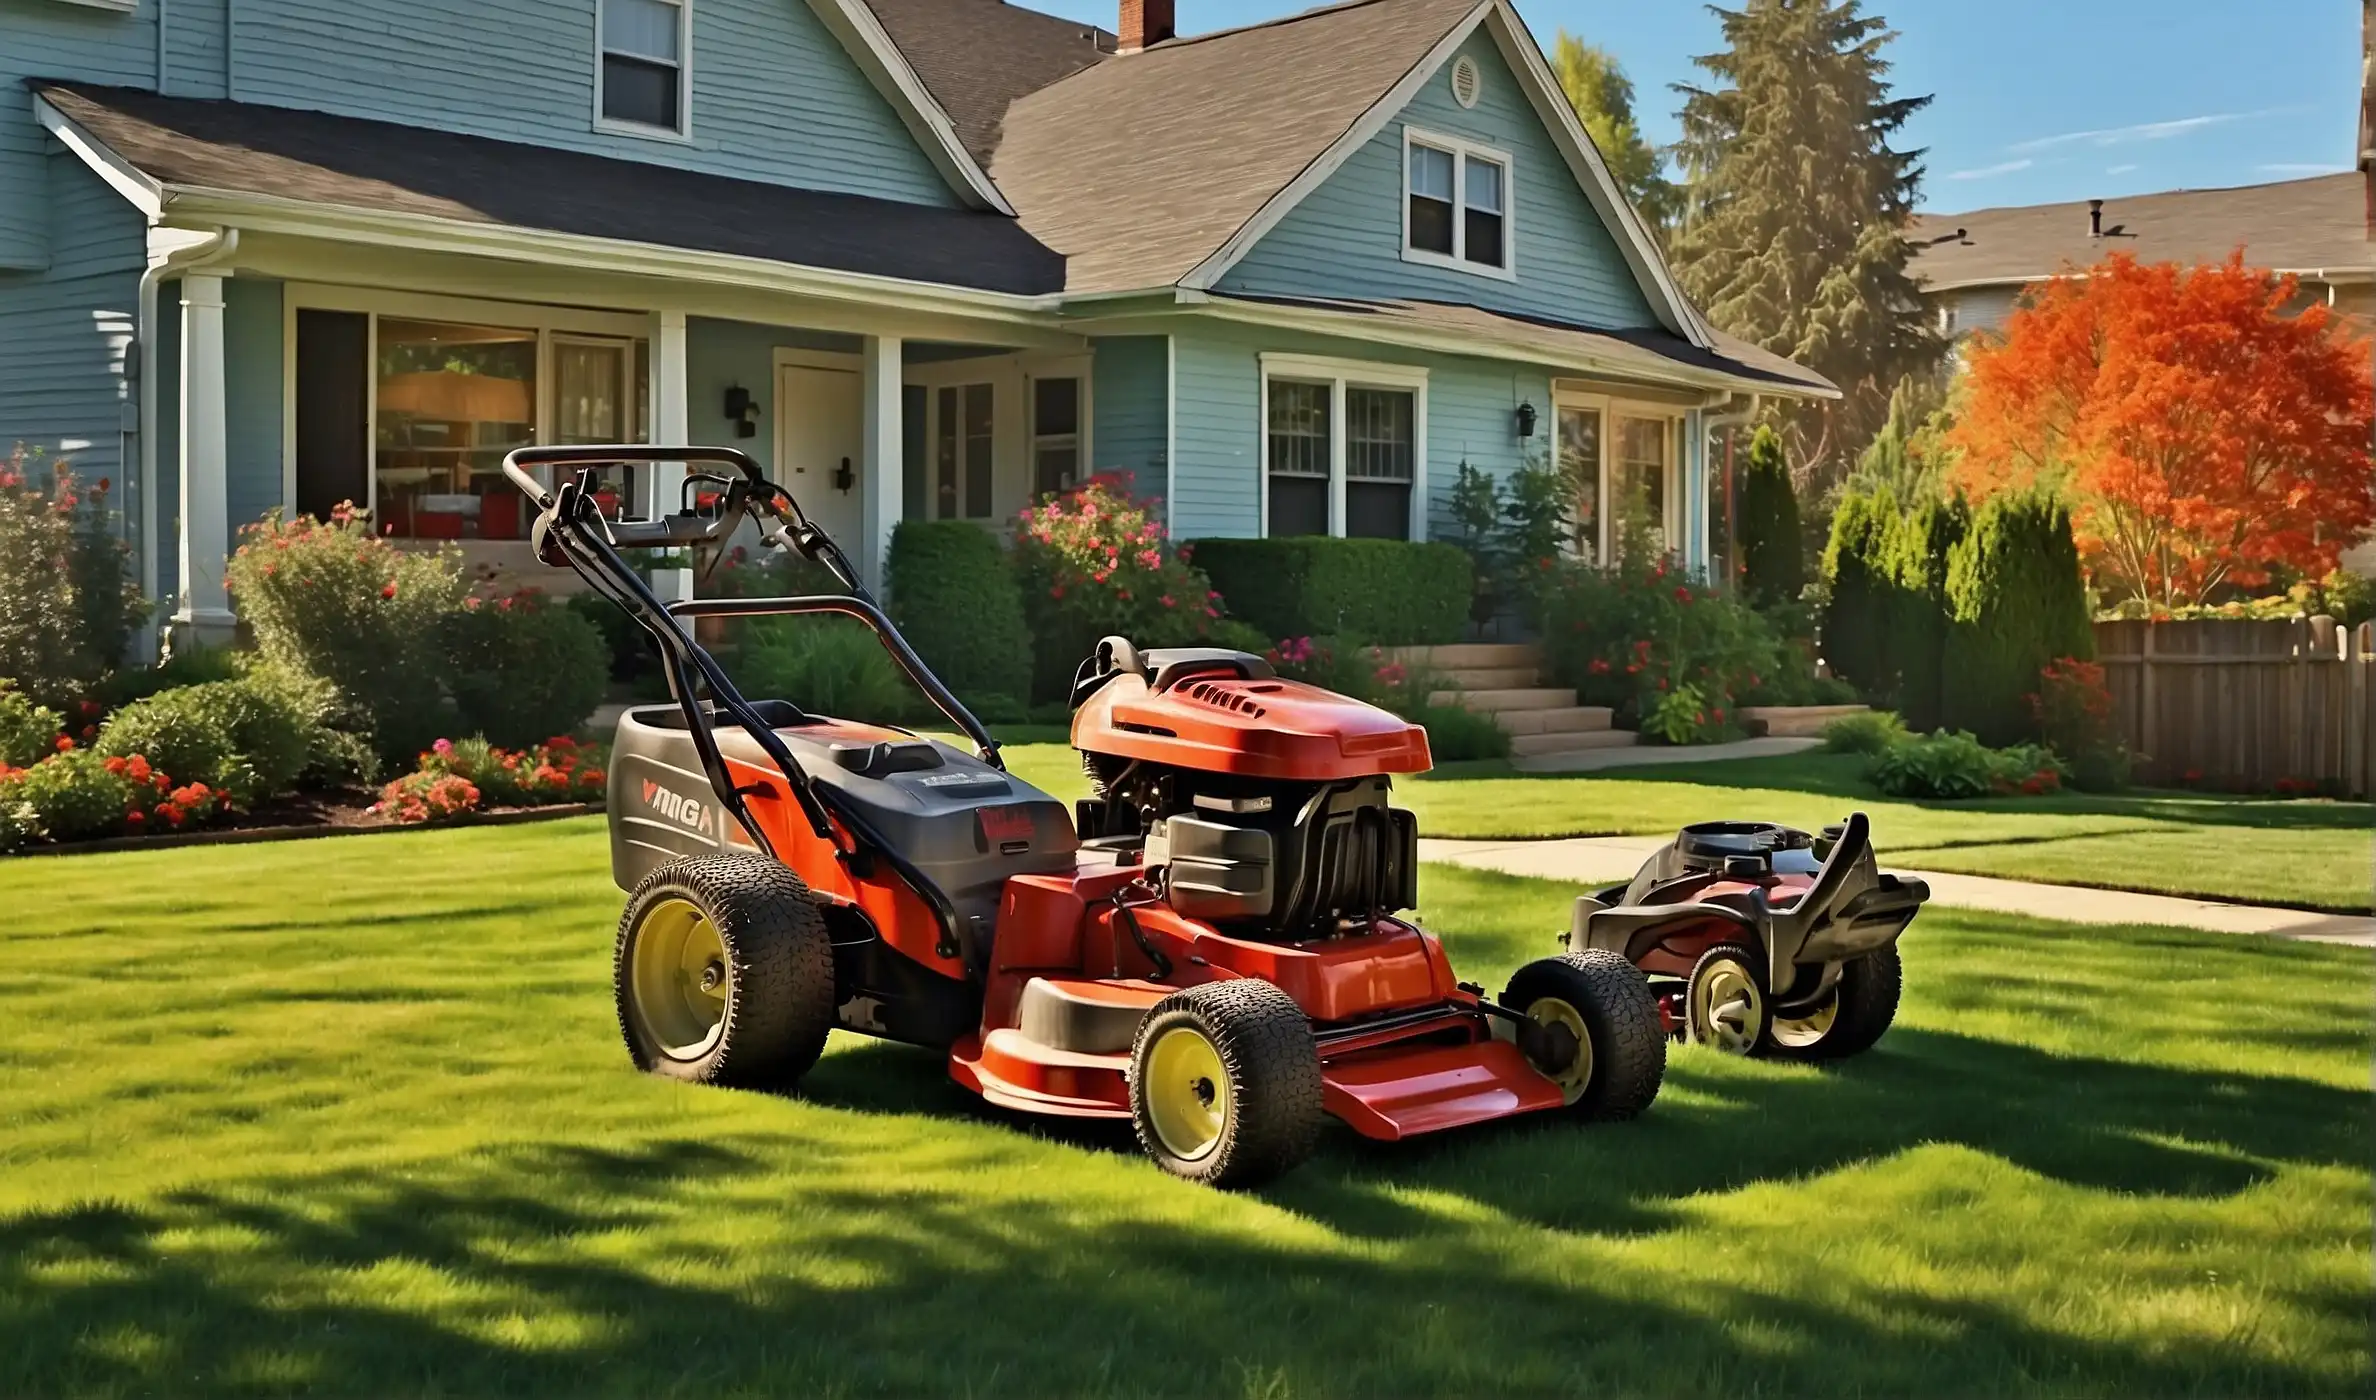 Lawn Mower Won’t Start? Quick Fixes to Try Now!